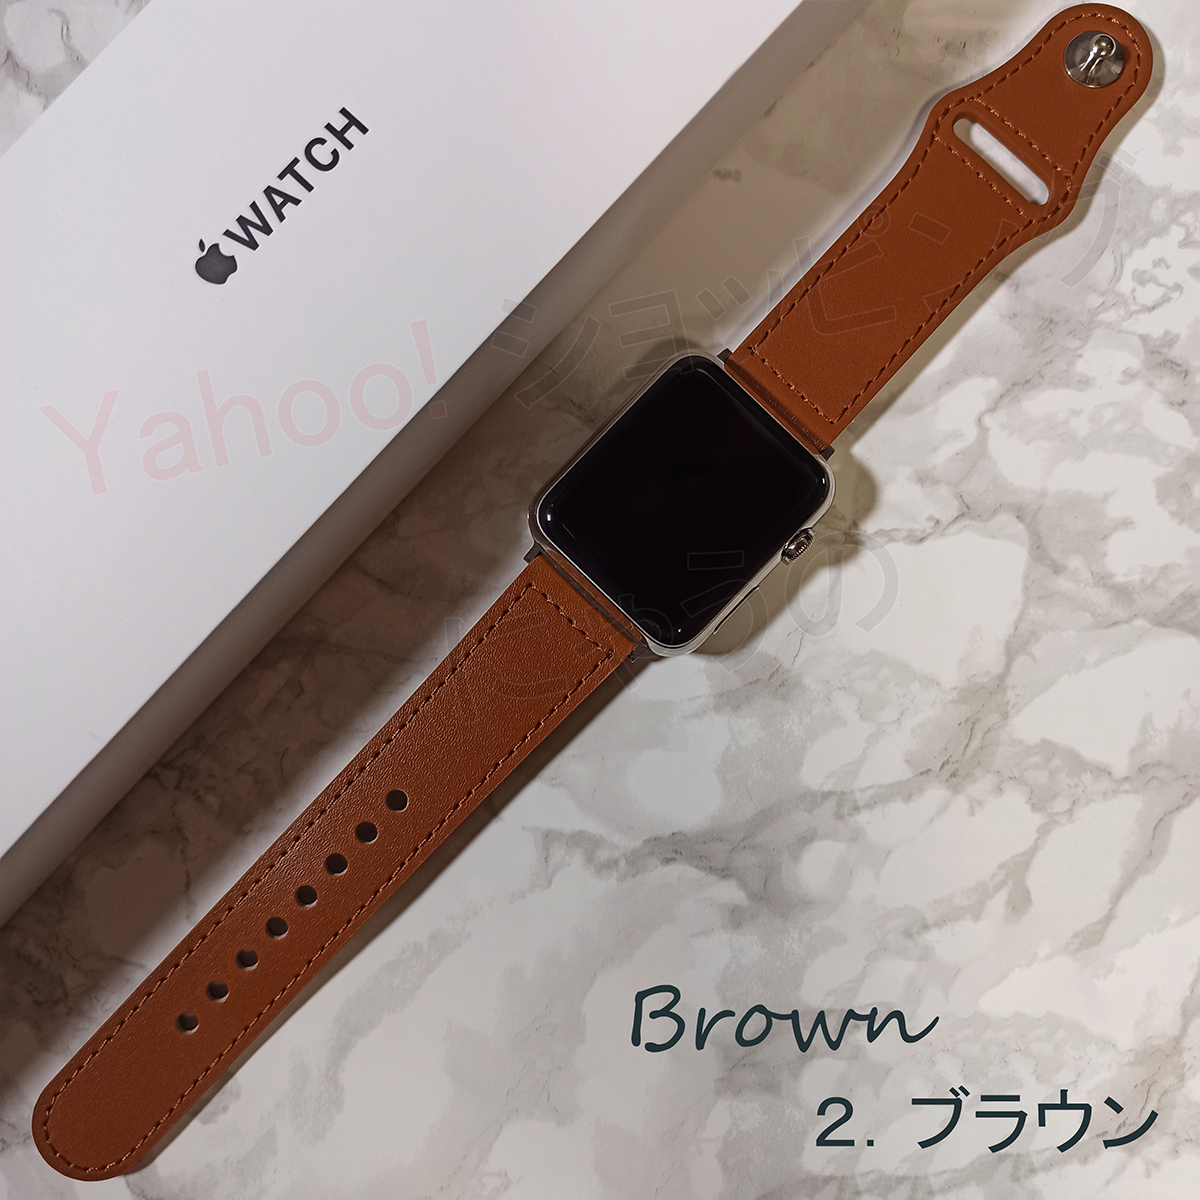  Apple watch band leather leather Apple Watch 38 40 41mm 42 44 45mm 49 Series 9 8 7 6 SE 5 3 stylish men's lady's exchange connector stop 